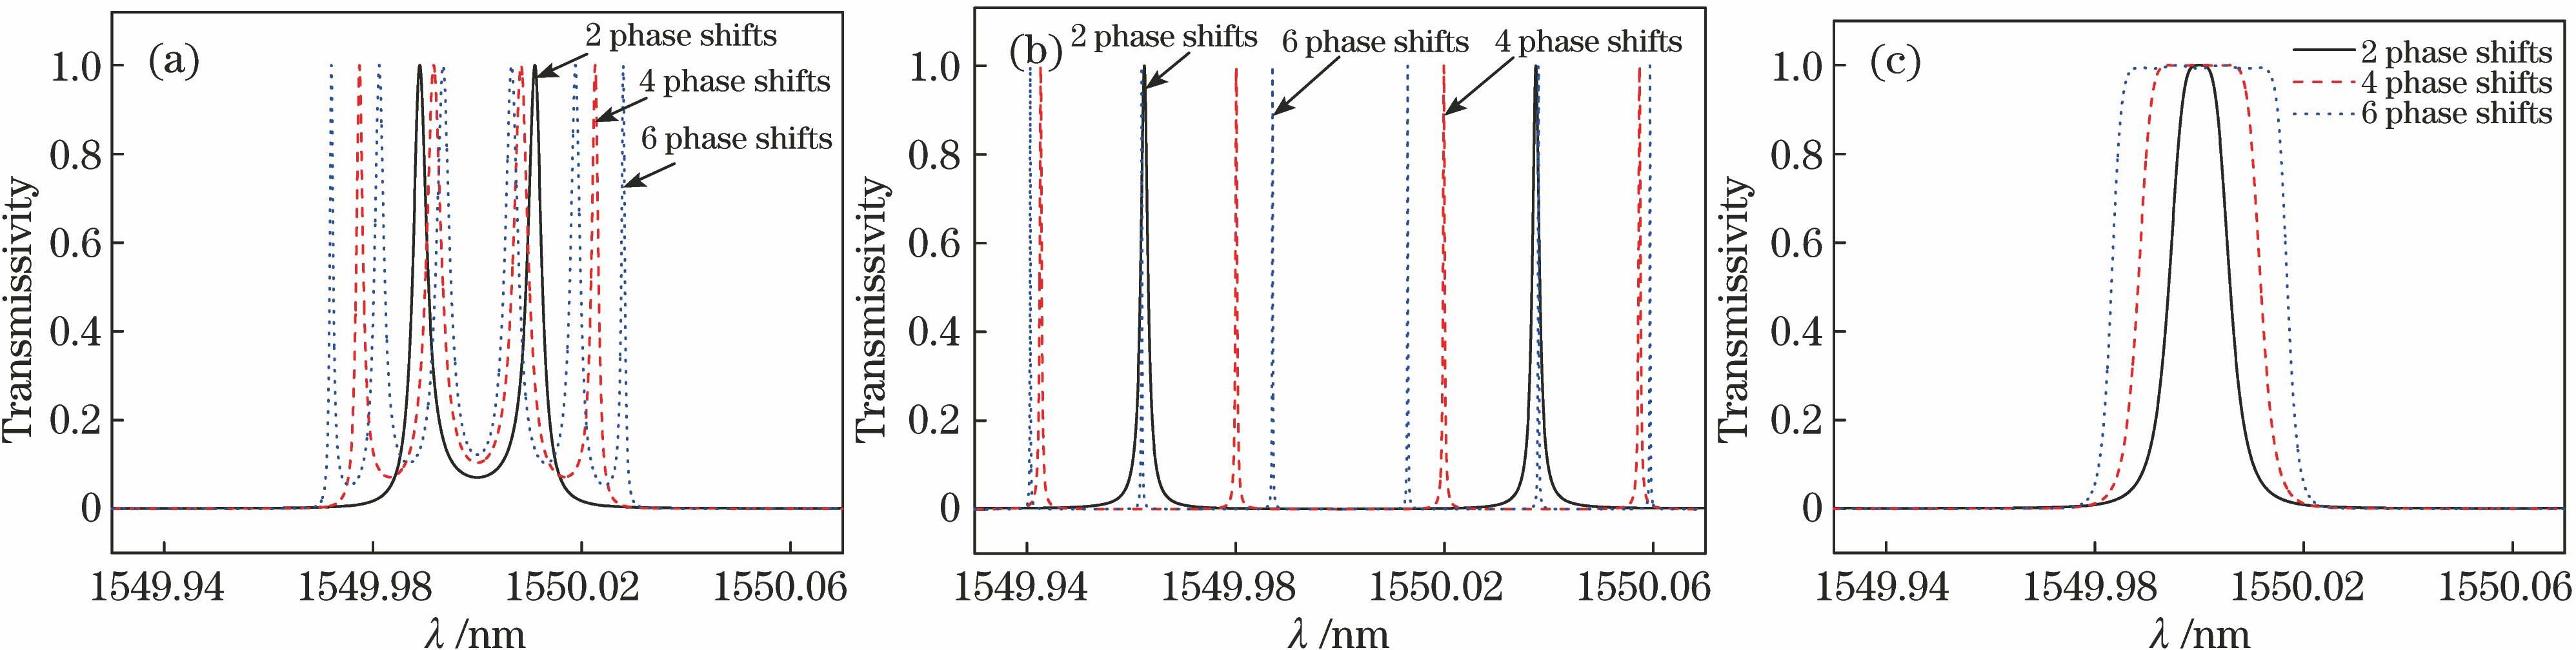 Spectra of MPSFBGs with 2, 4, and 6 phase shifts. The ratios of the lengths of subgratings are (a) 1∶1∶1, 1∶1 ∶1 ∶1 ∶1, and 1∶1∶1∶1∶1∶1∶1; (b)3∶1∶3, 3∶1∶1∶1∶3, and 3∶1∶1∶1∶1∶1∶3; (c) 1∶2∶1, 1∶2.3∶2.6∶2.3∶1, and 1∶2.2∶2.6∶2.7∶2.6∶2.2∶1, respectively